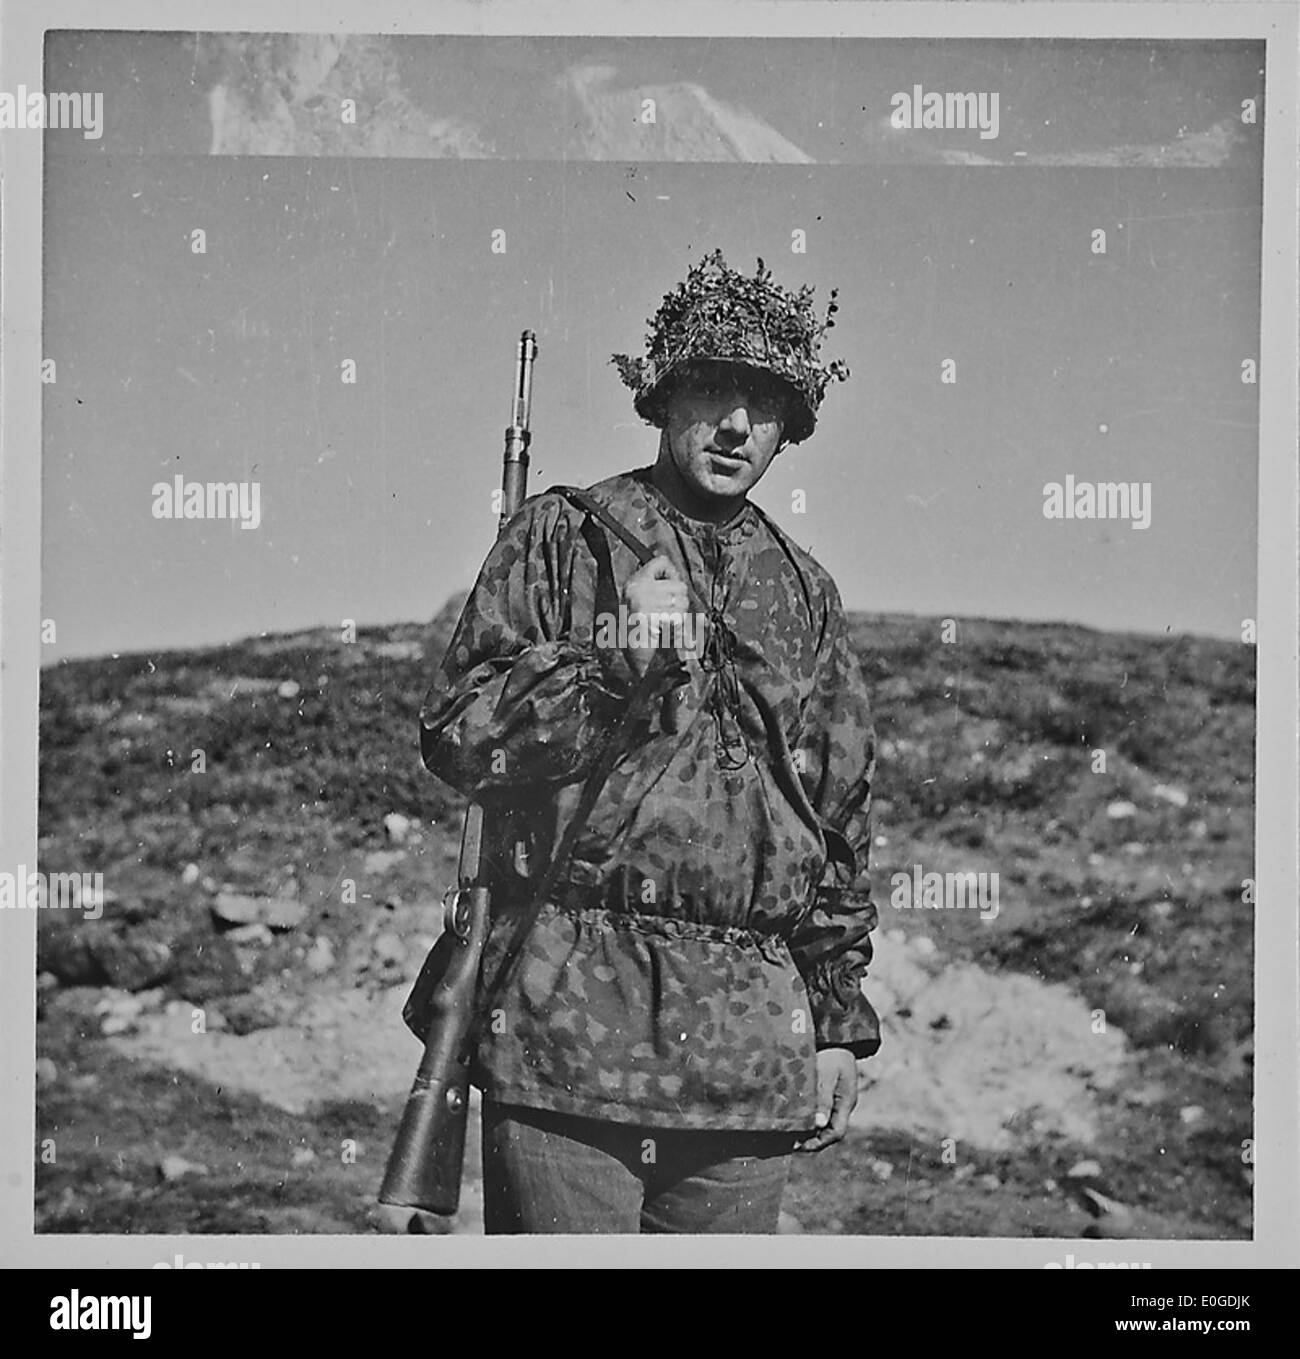 James smither abercrombie Black and White Stock Photos & Images - Alamy